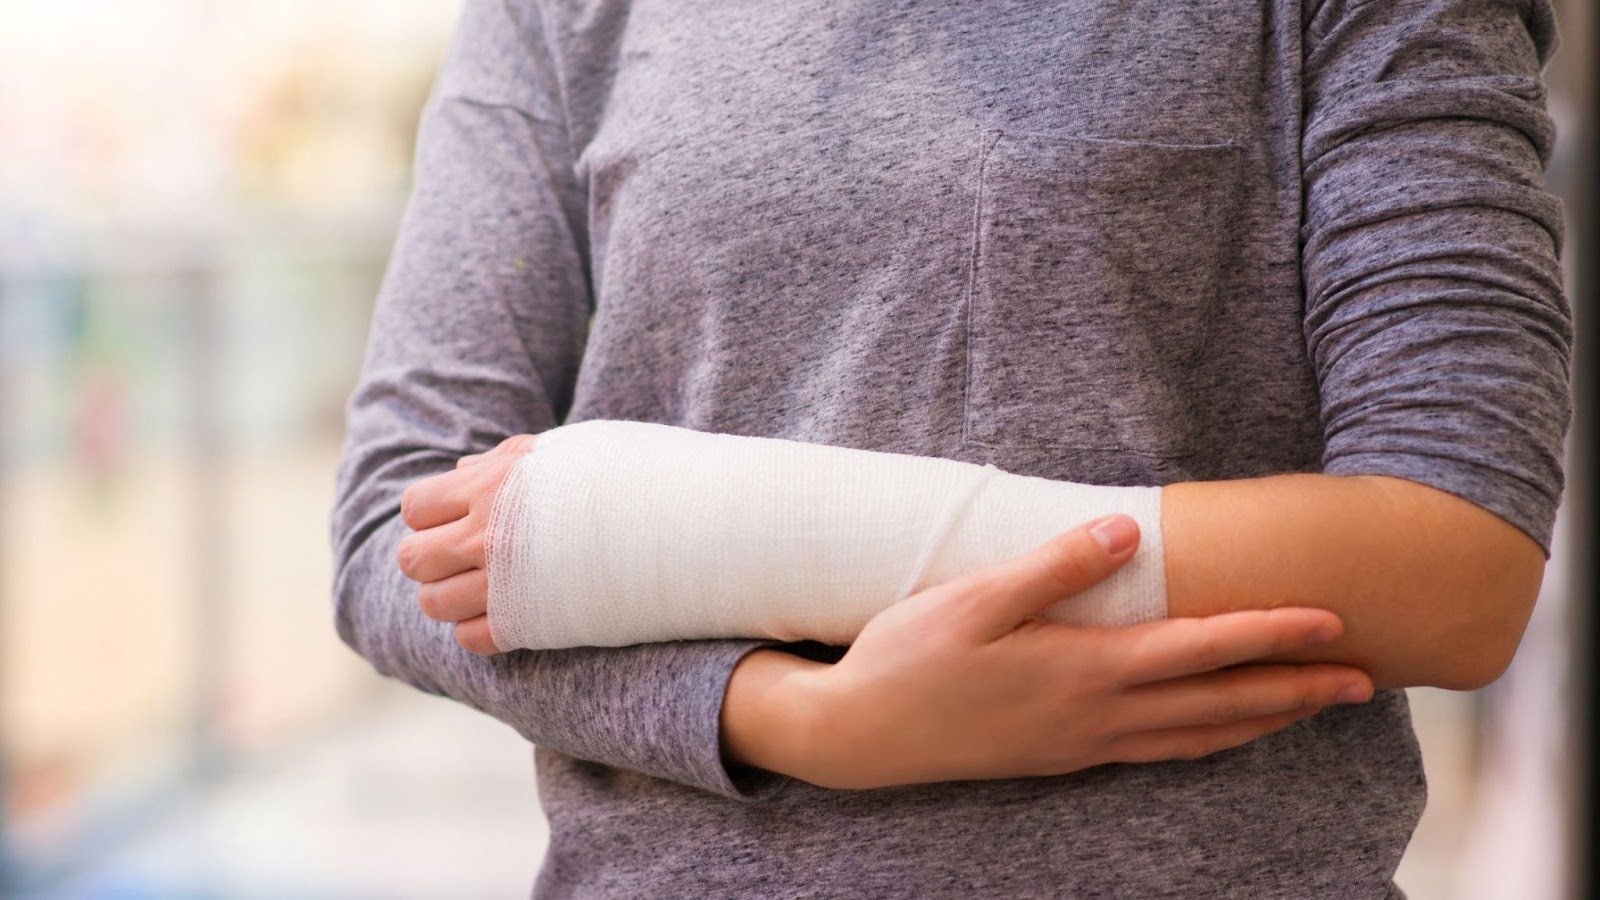 How To Qualify for SSDI for a Non-Healing Fracture to an Upper Extremity